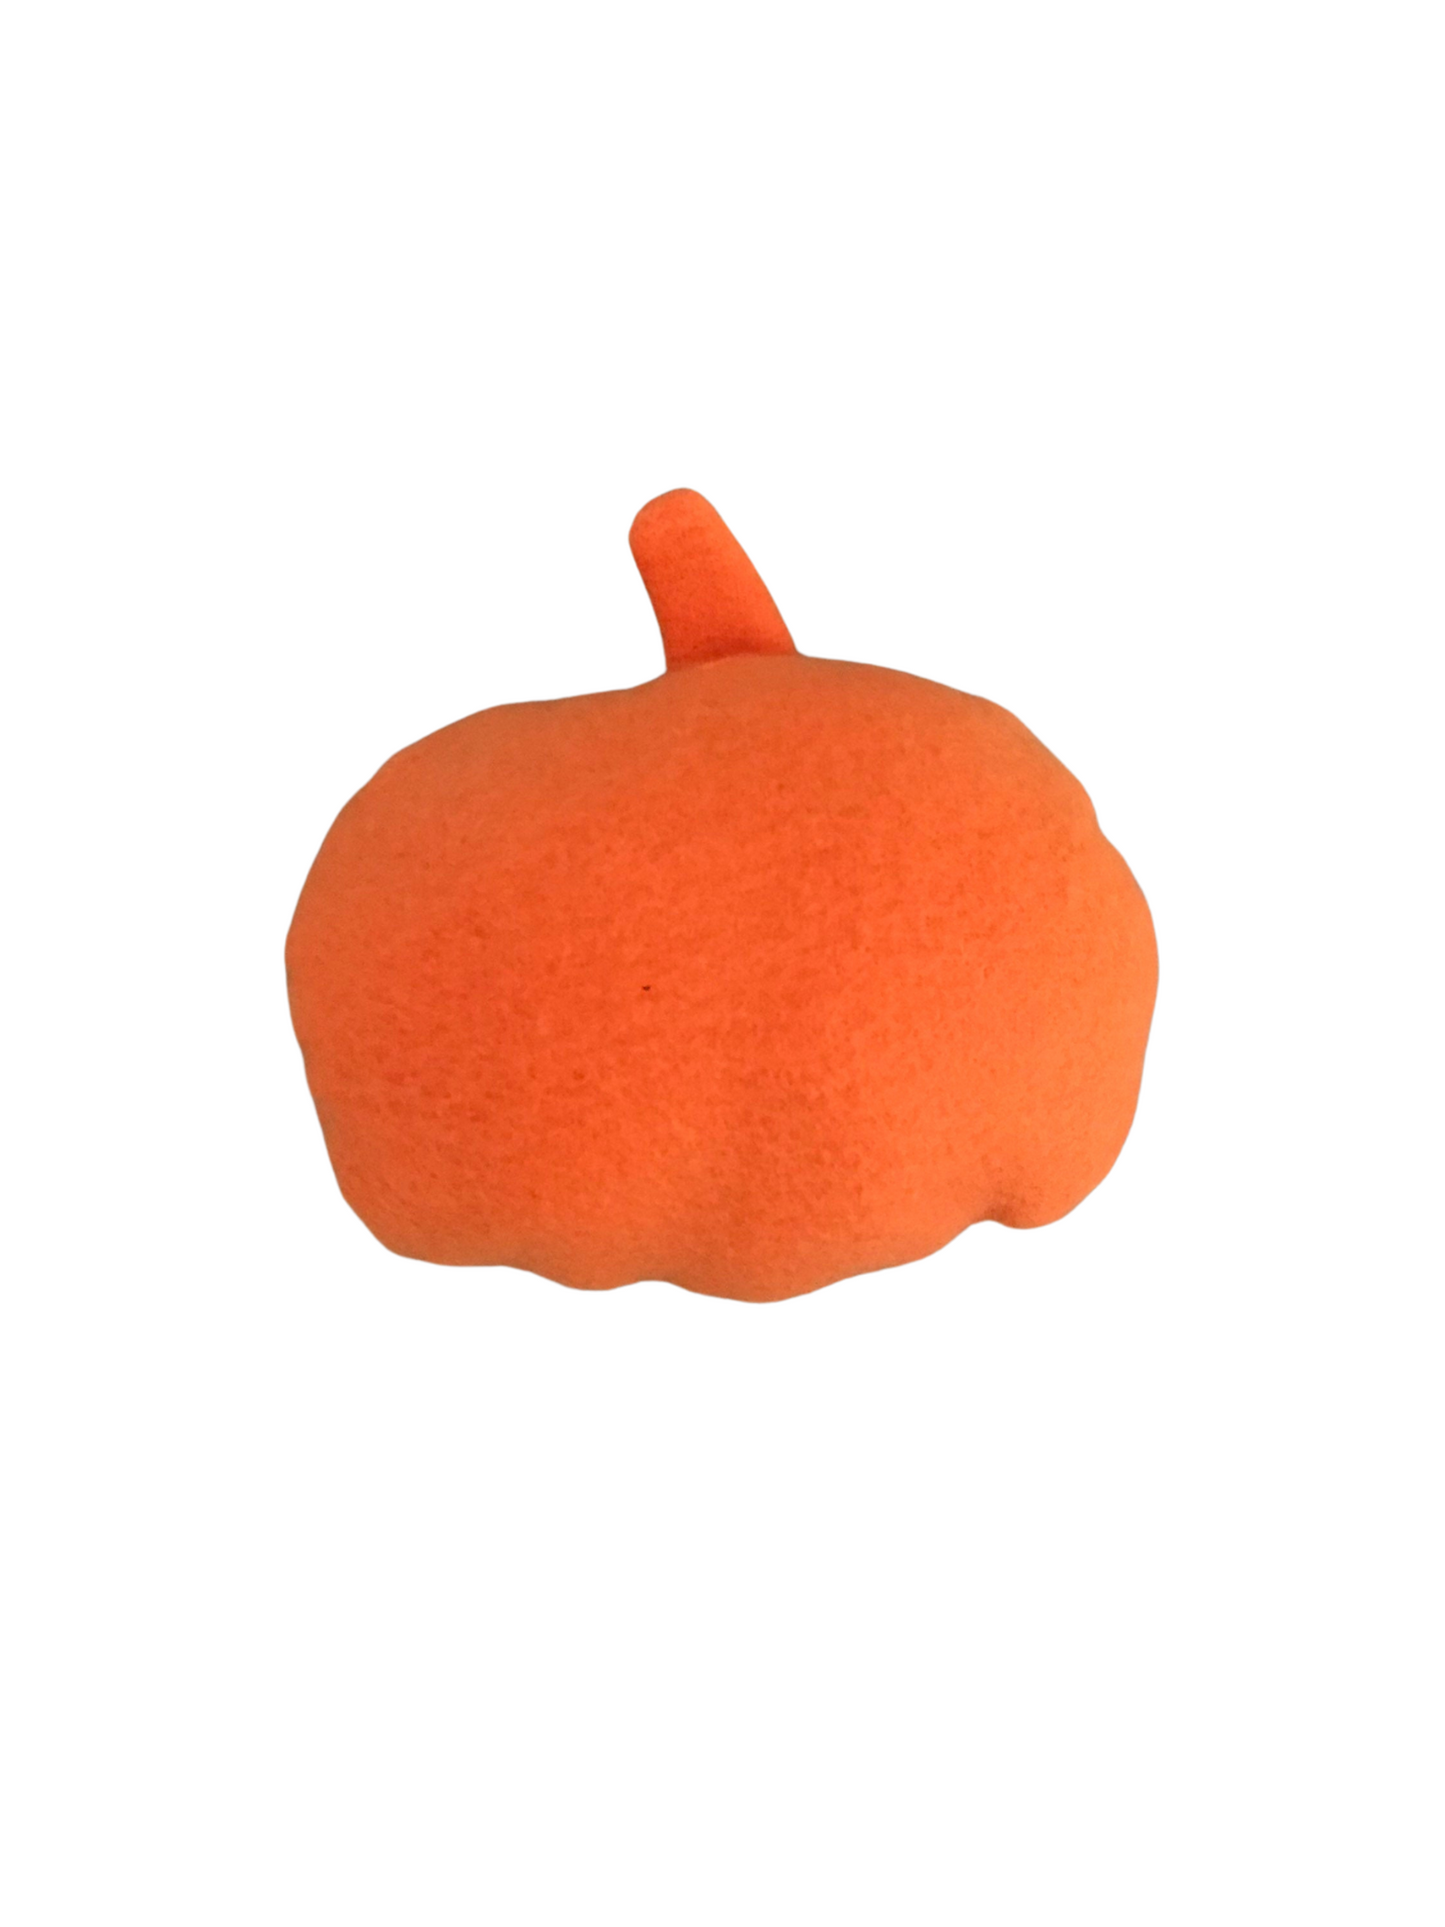 Pumpkin Custom Dog Toy - Halloween Personalized Squeaky Toy Dog Toys   